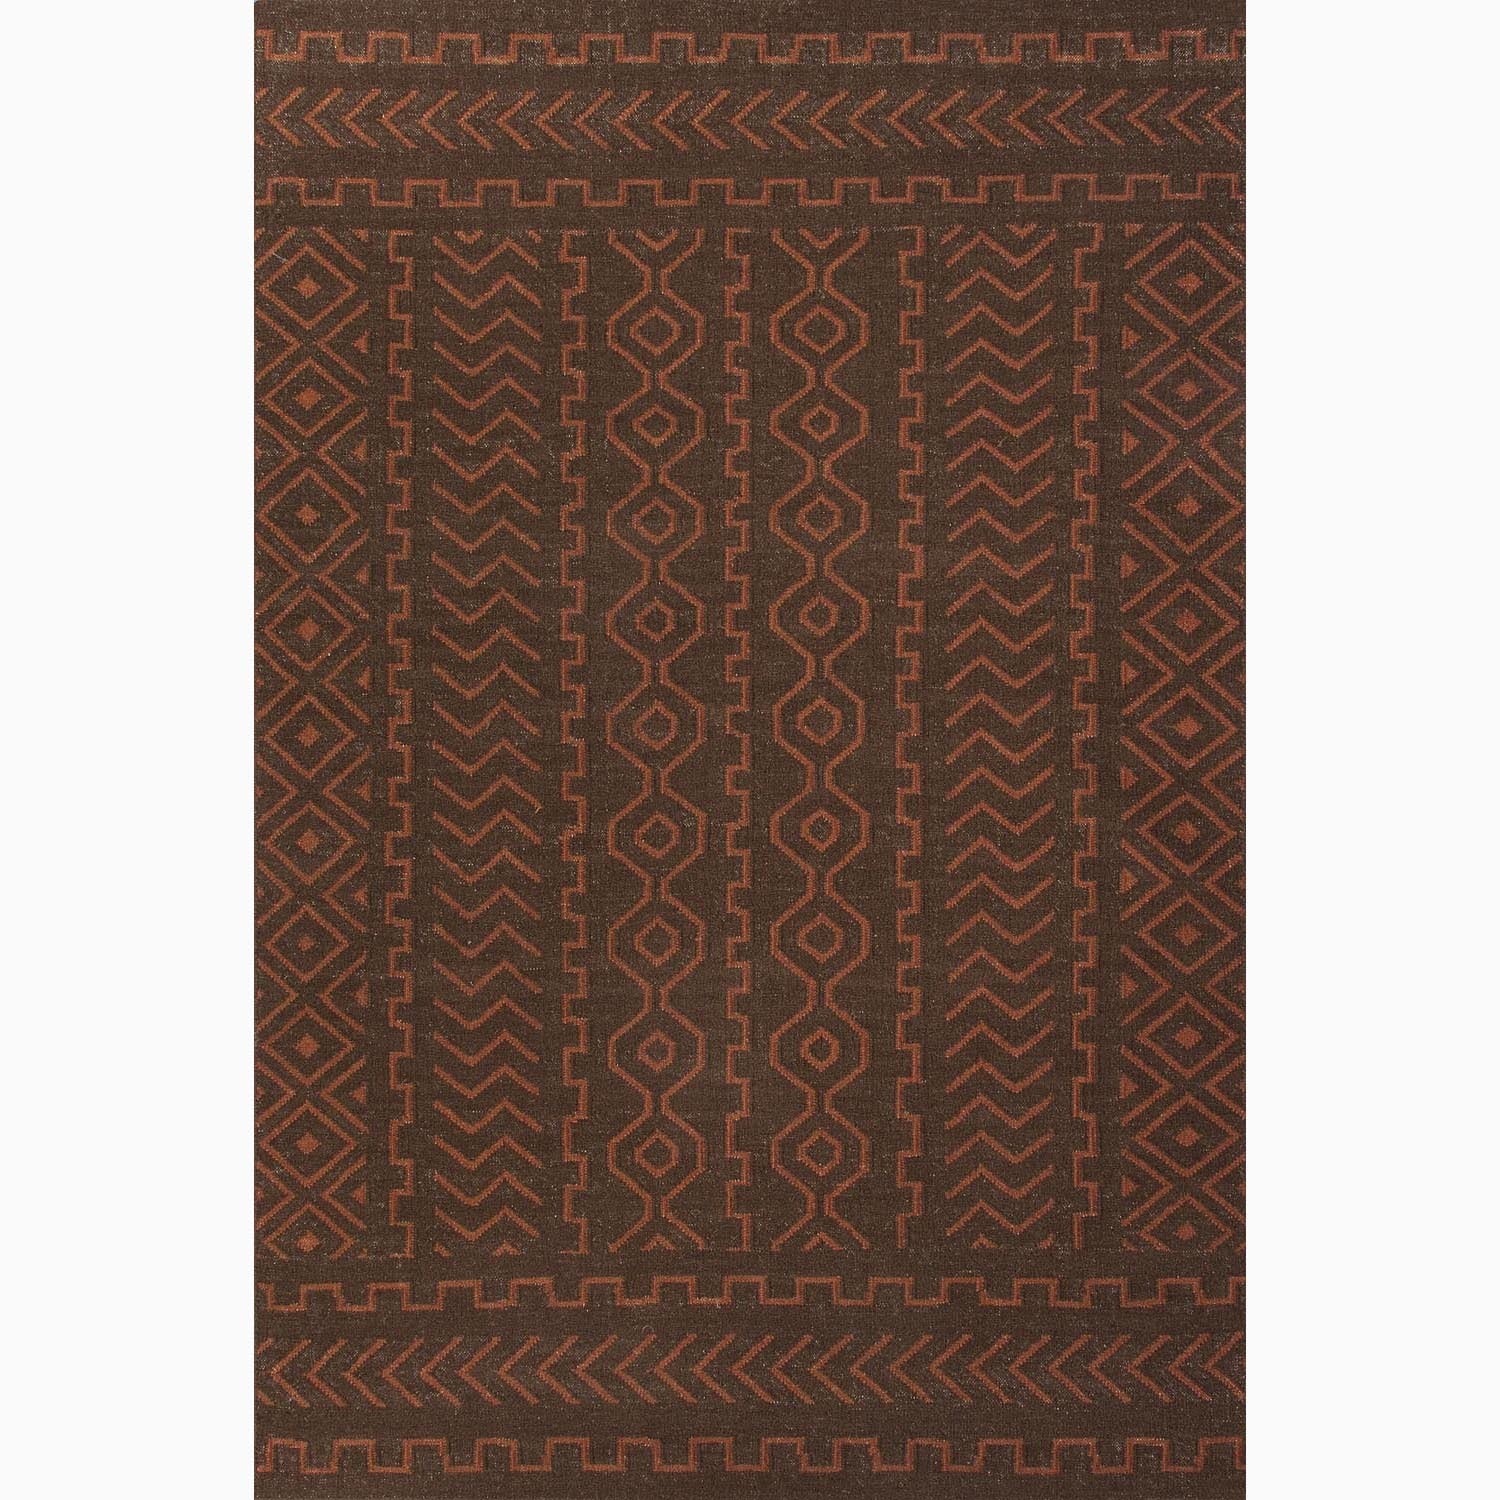 Hand made Tribal Pattern Brown/ Red Wool Rug (5x8)